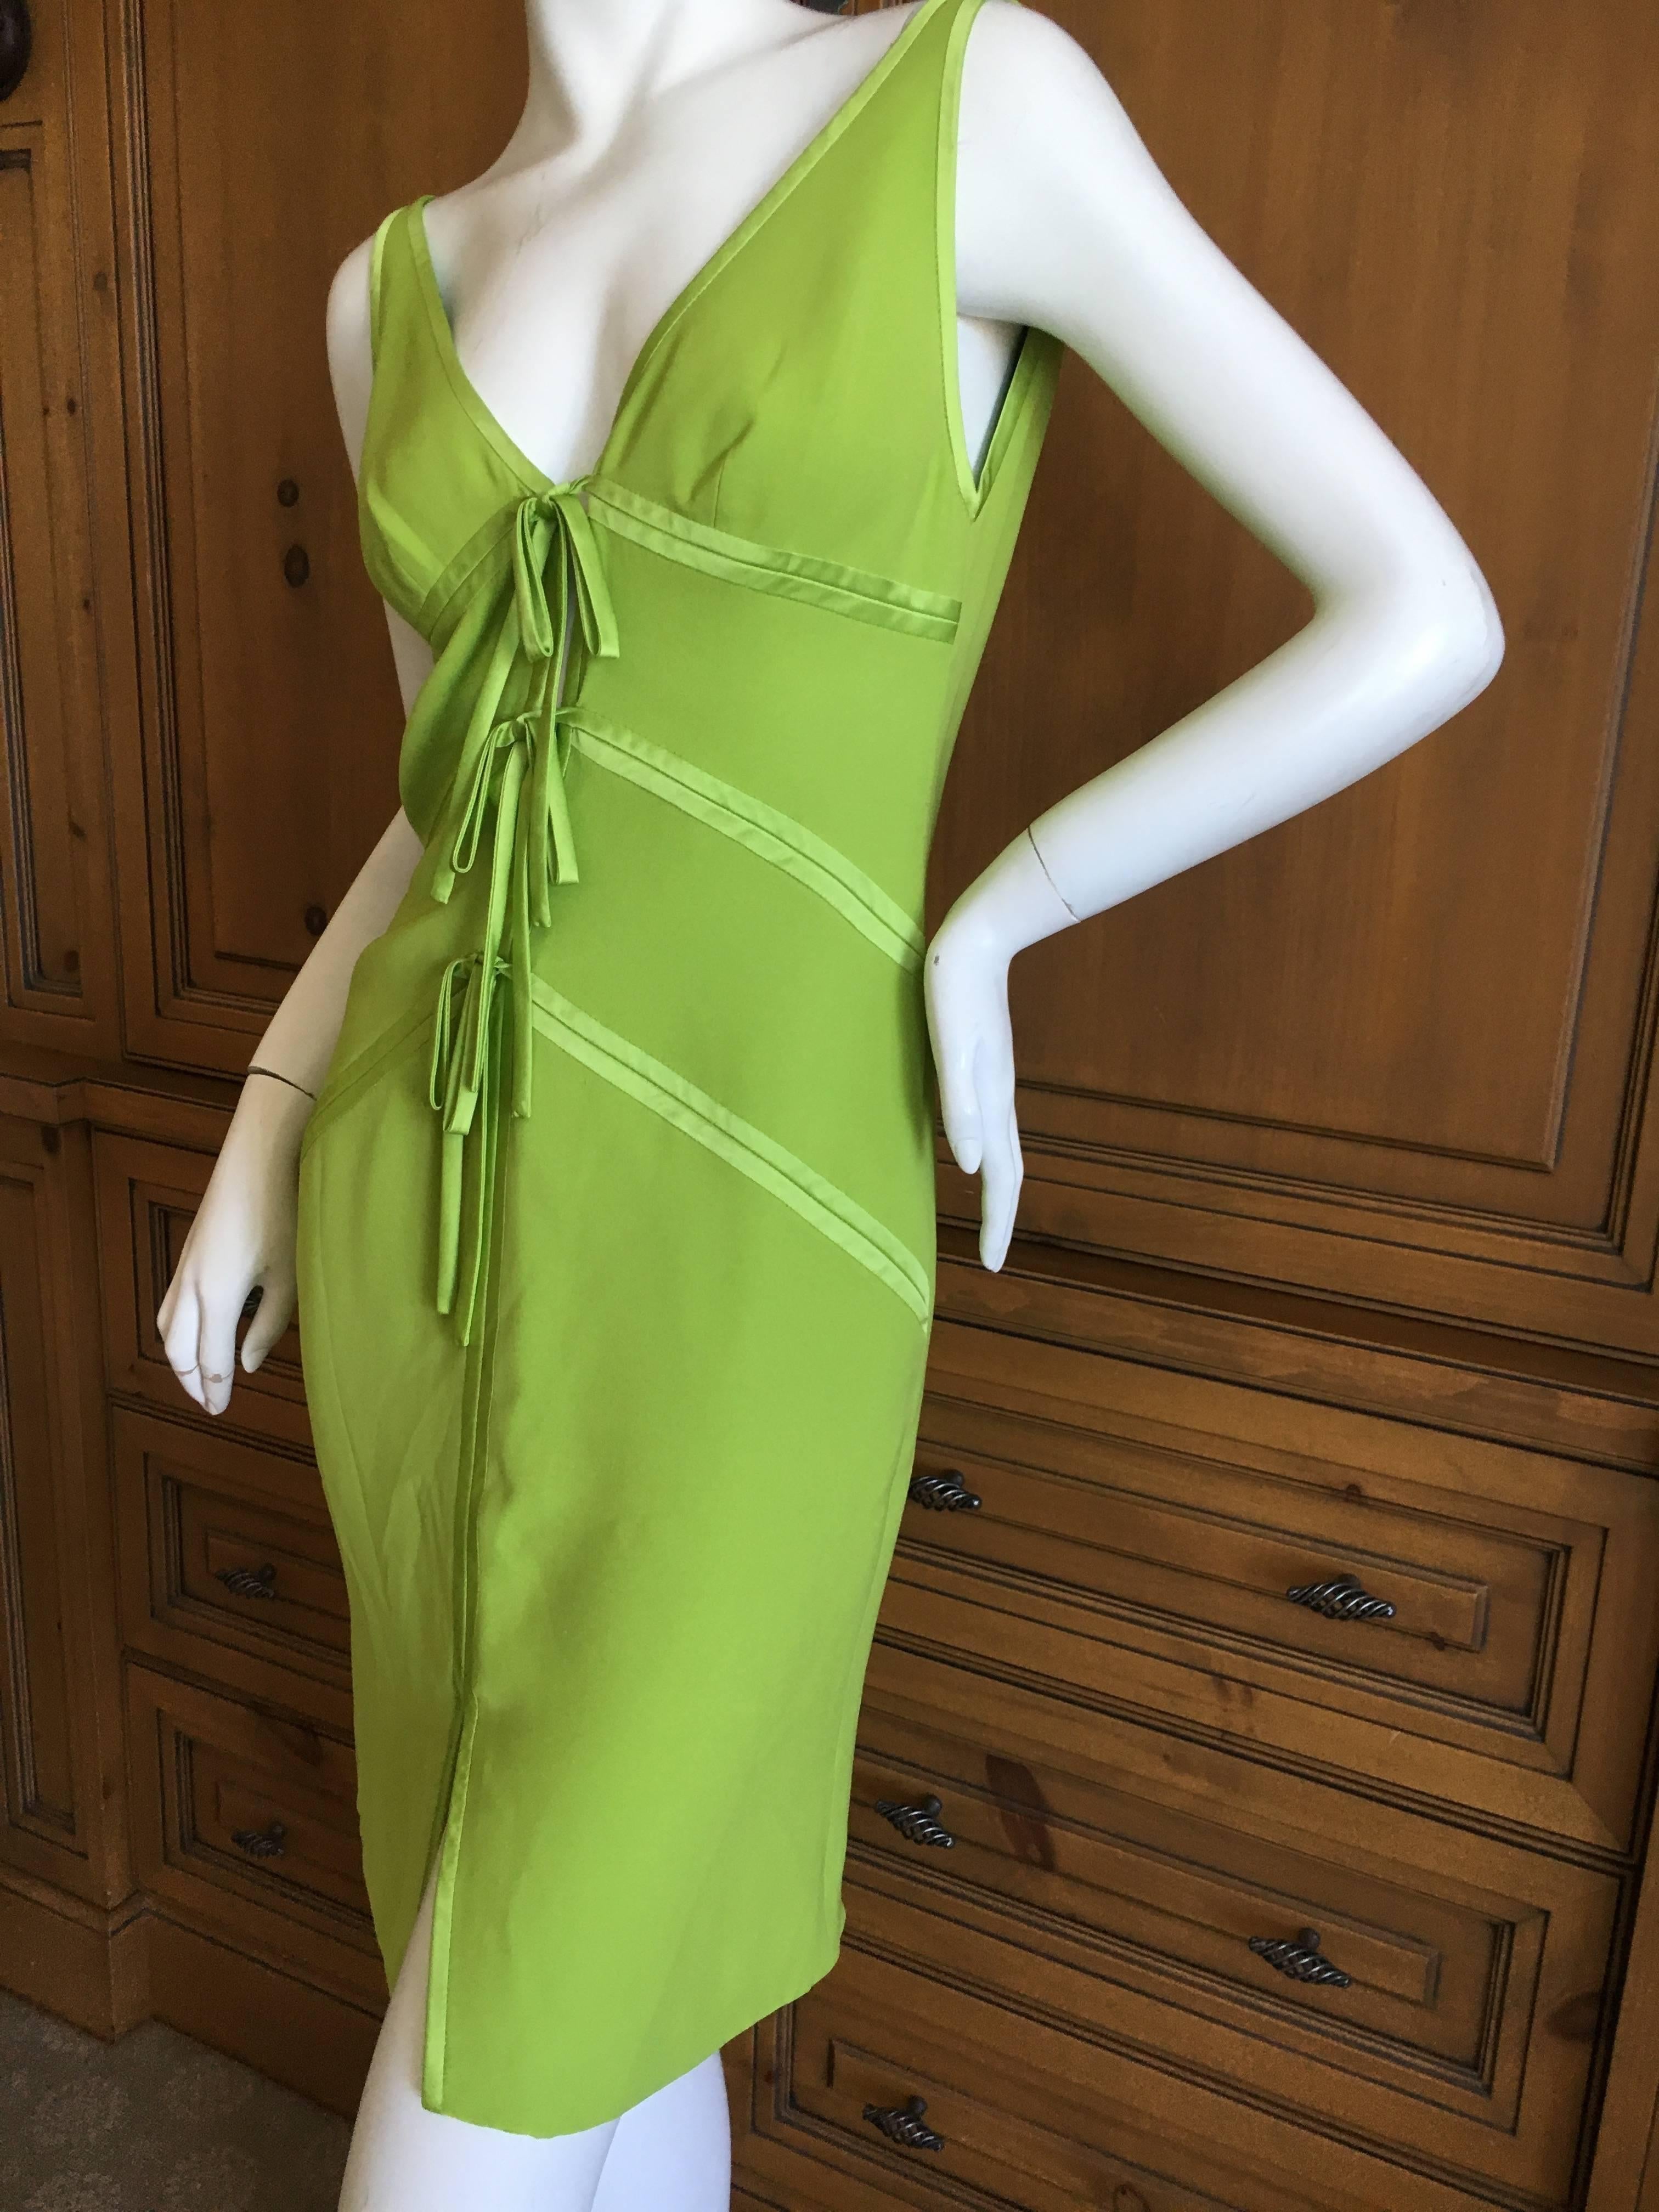 Valentino Vintage Green Silk Cocktail Dress with Peek a Boo Keyhole Details.
This is so  much prettier than the photo's show. 
Size 4